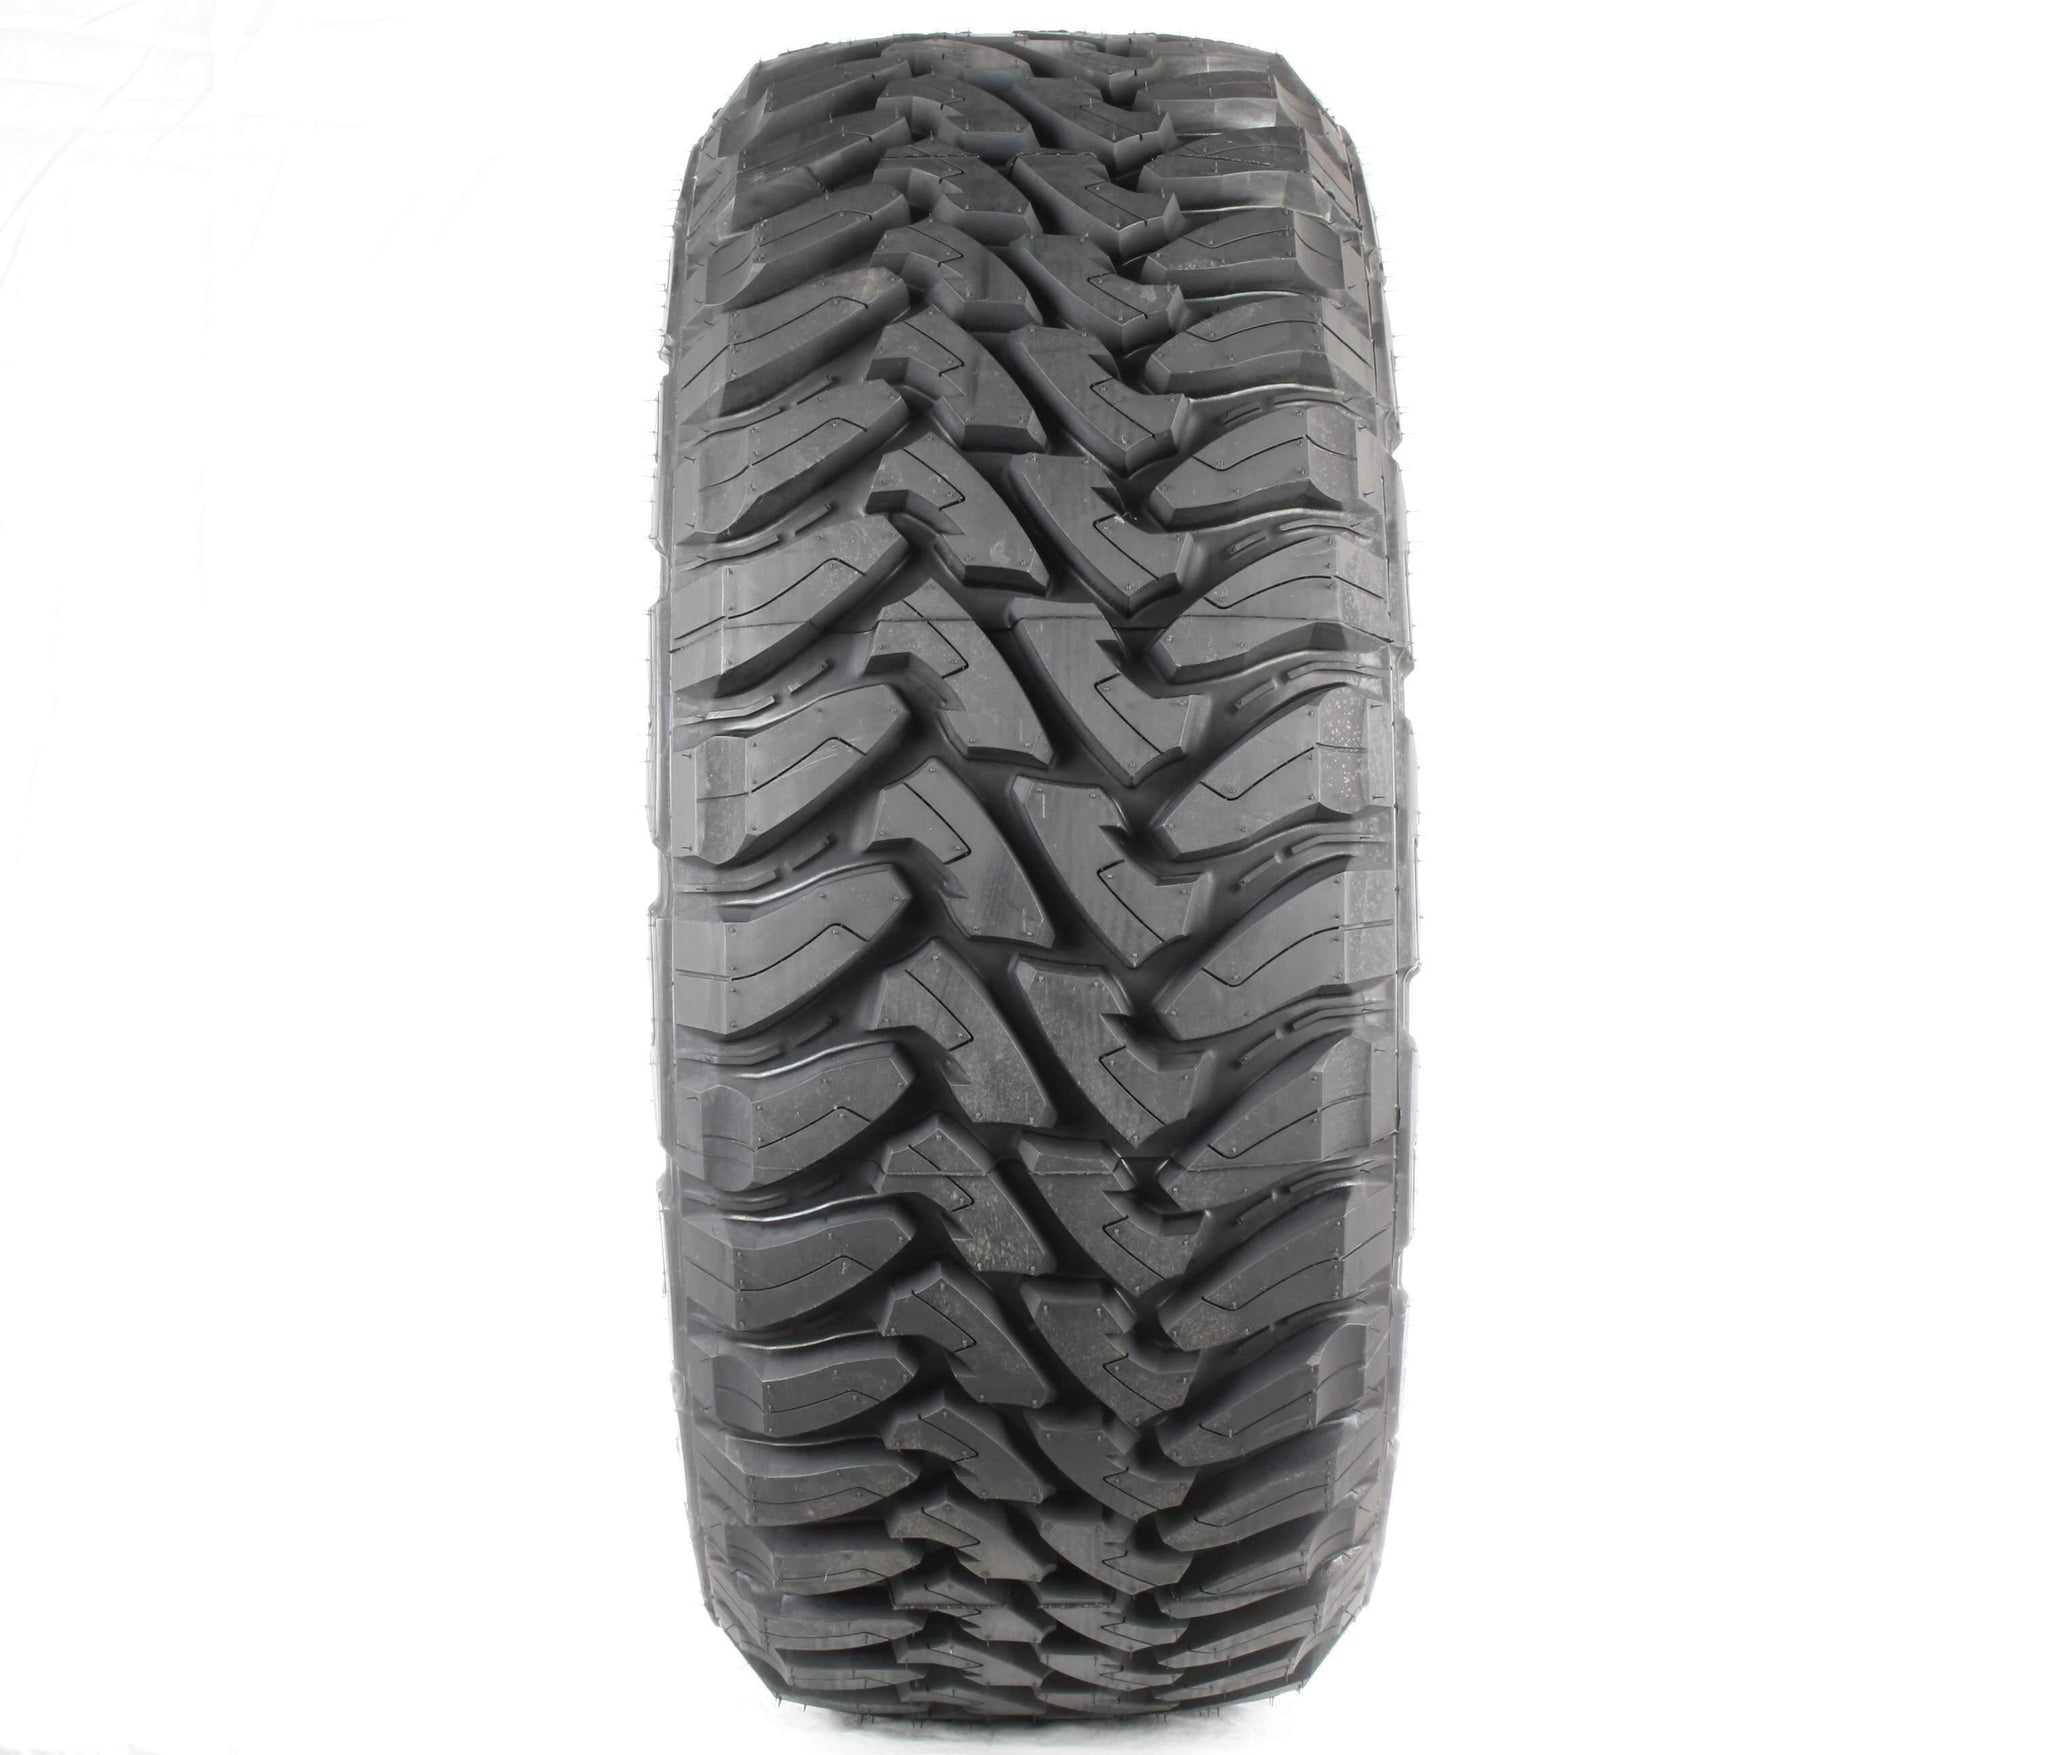 TOYO TIRES OPEN COUNTRY M/T LT255/75R17 (32.3X10R 17) Tires